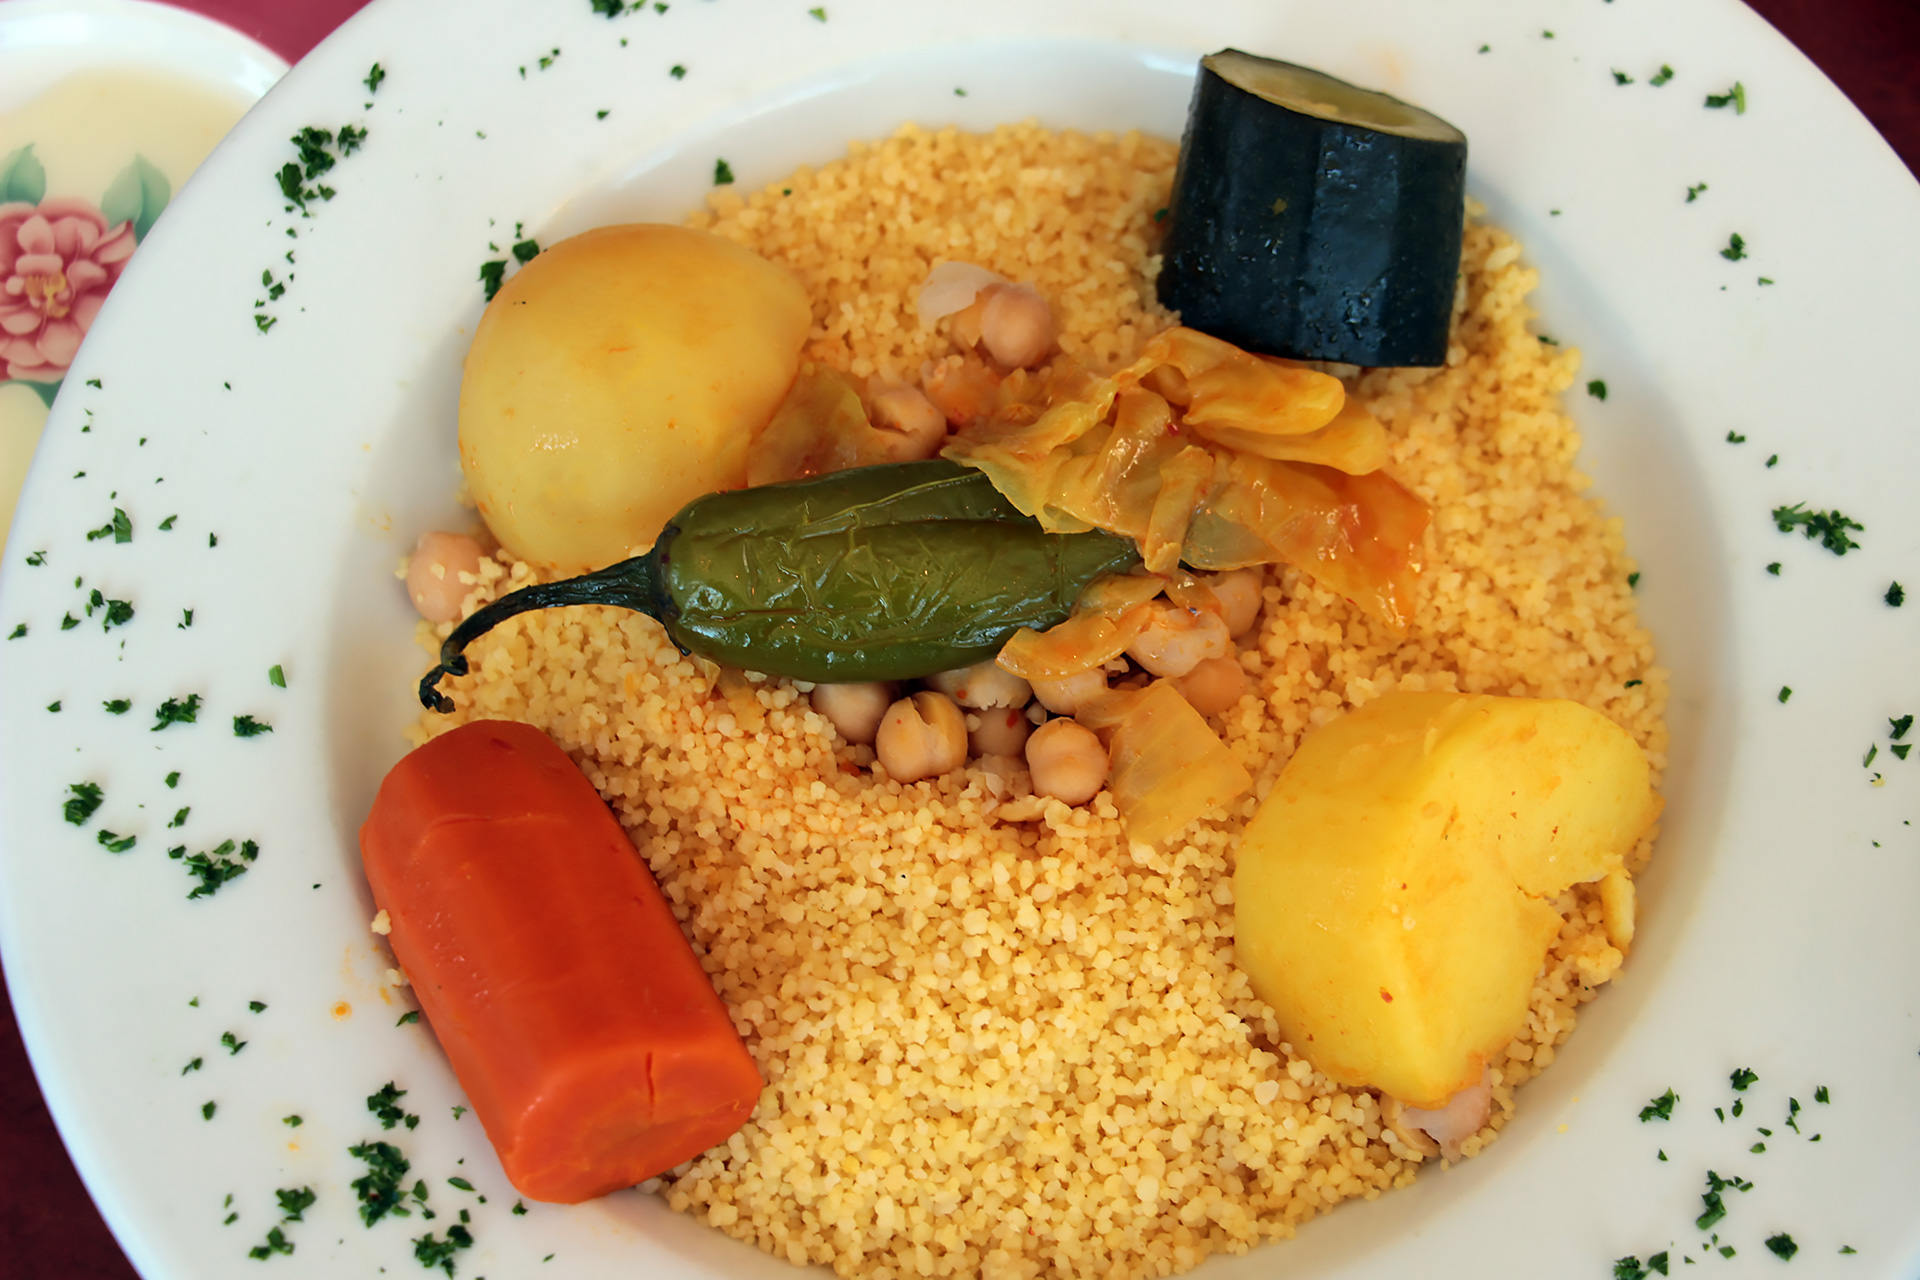 Couscous with chickpeas and vegetables.